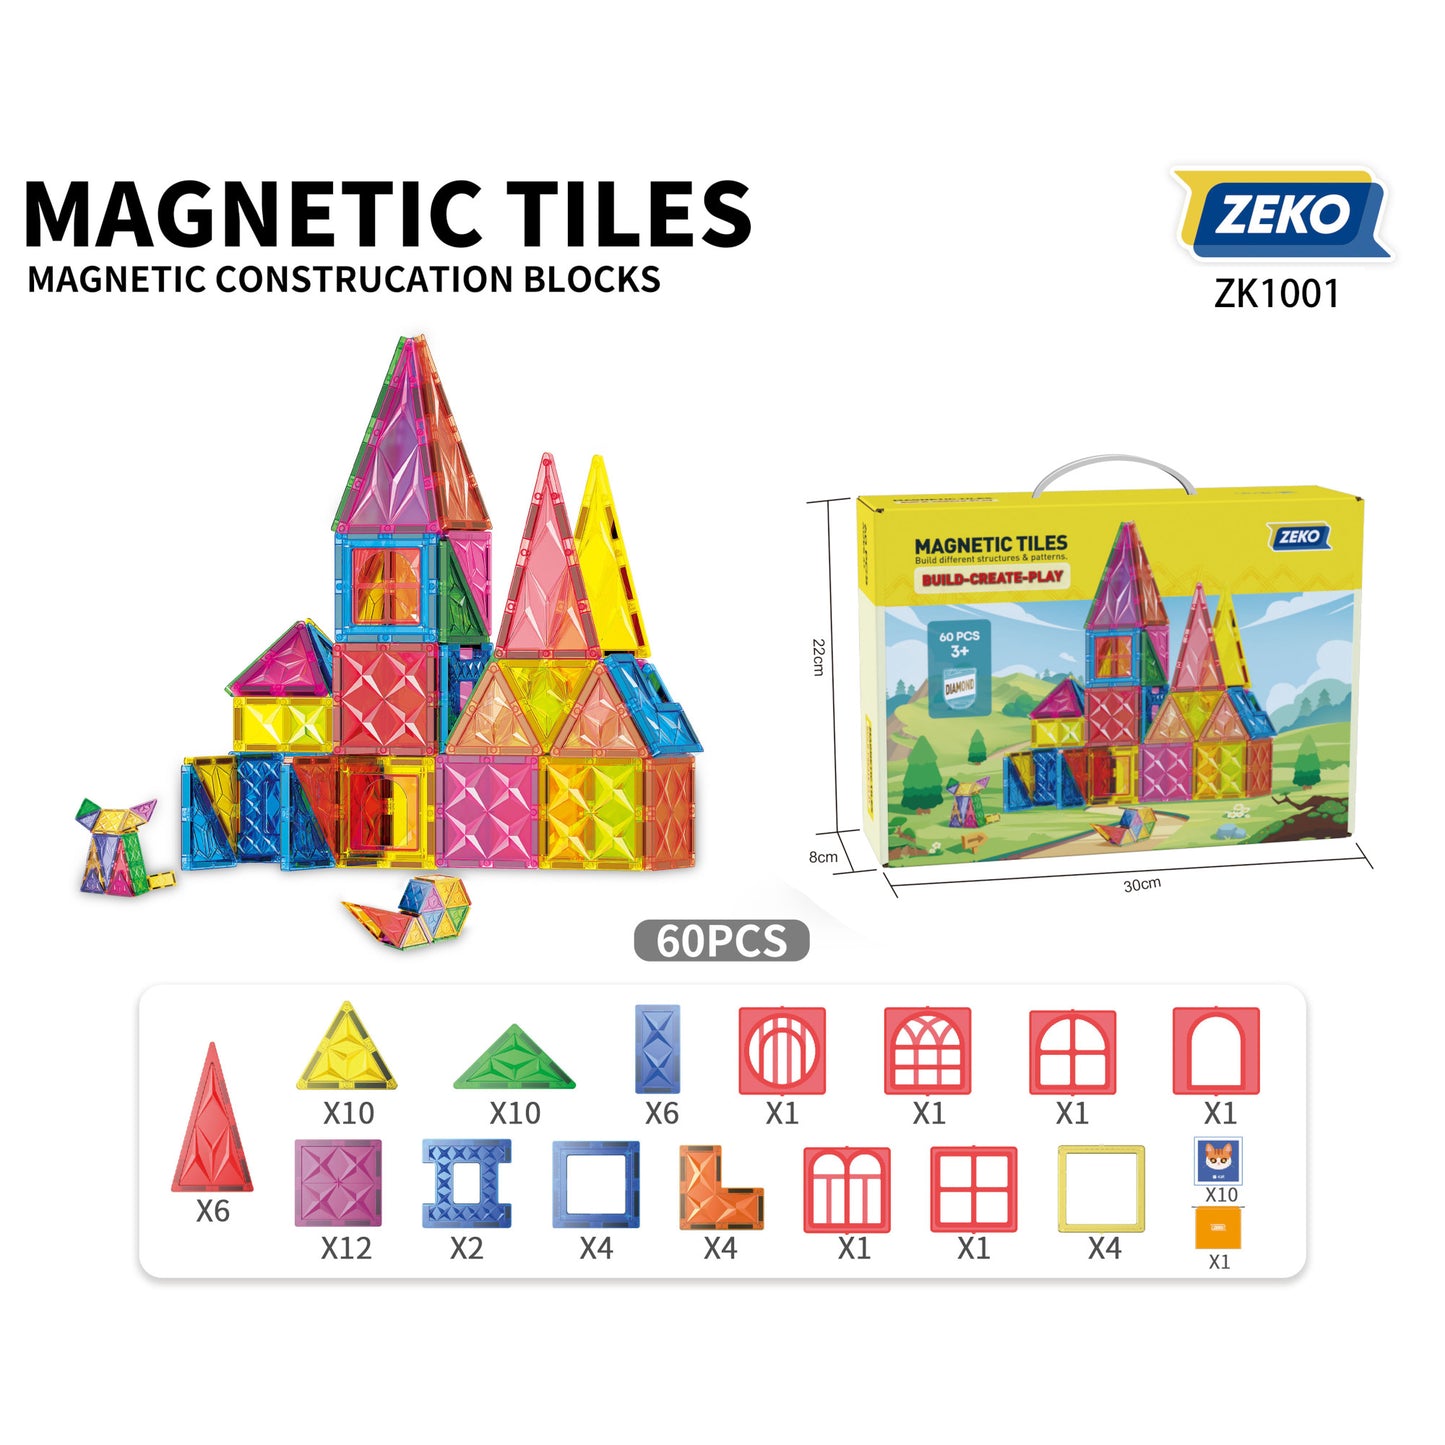 *Magnetic Tiles Build-Create-Play